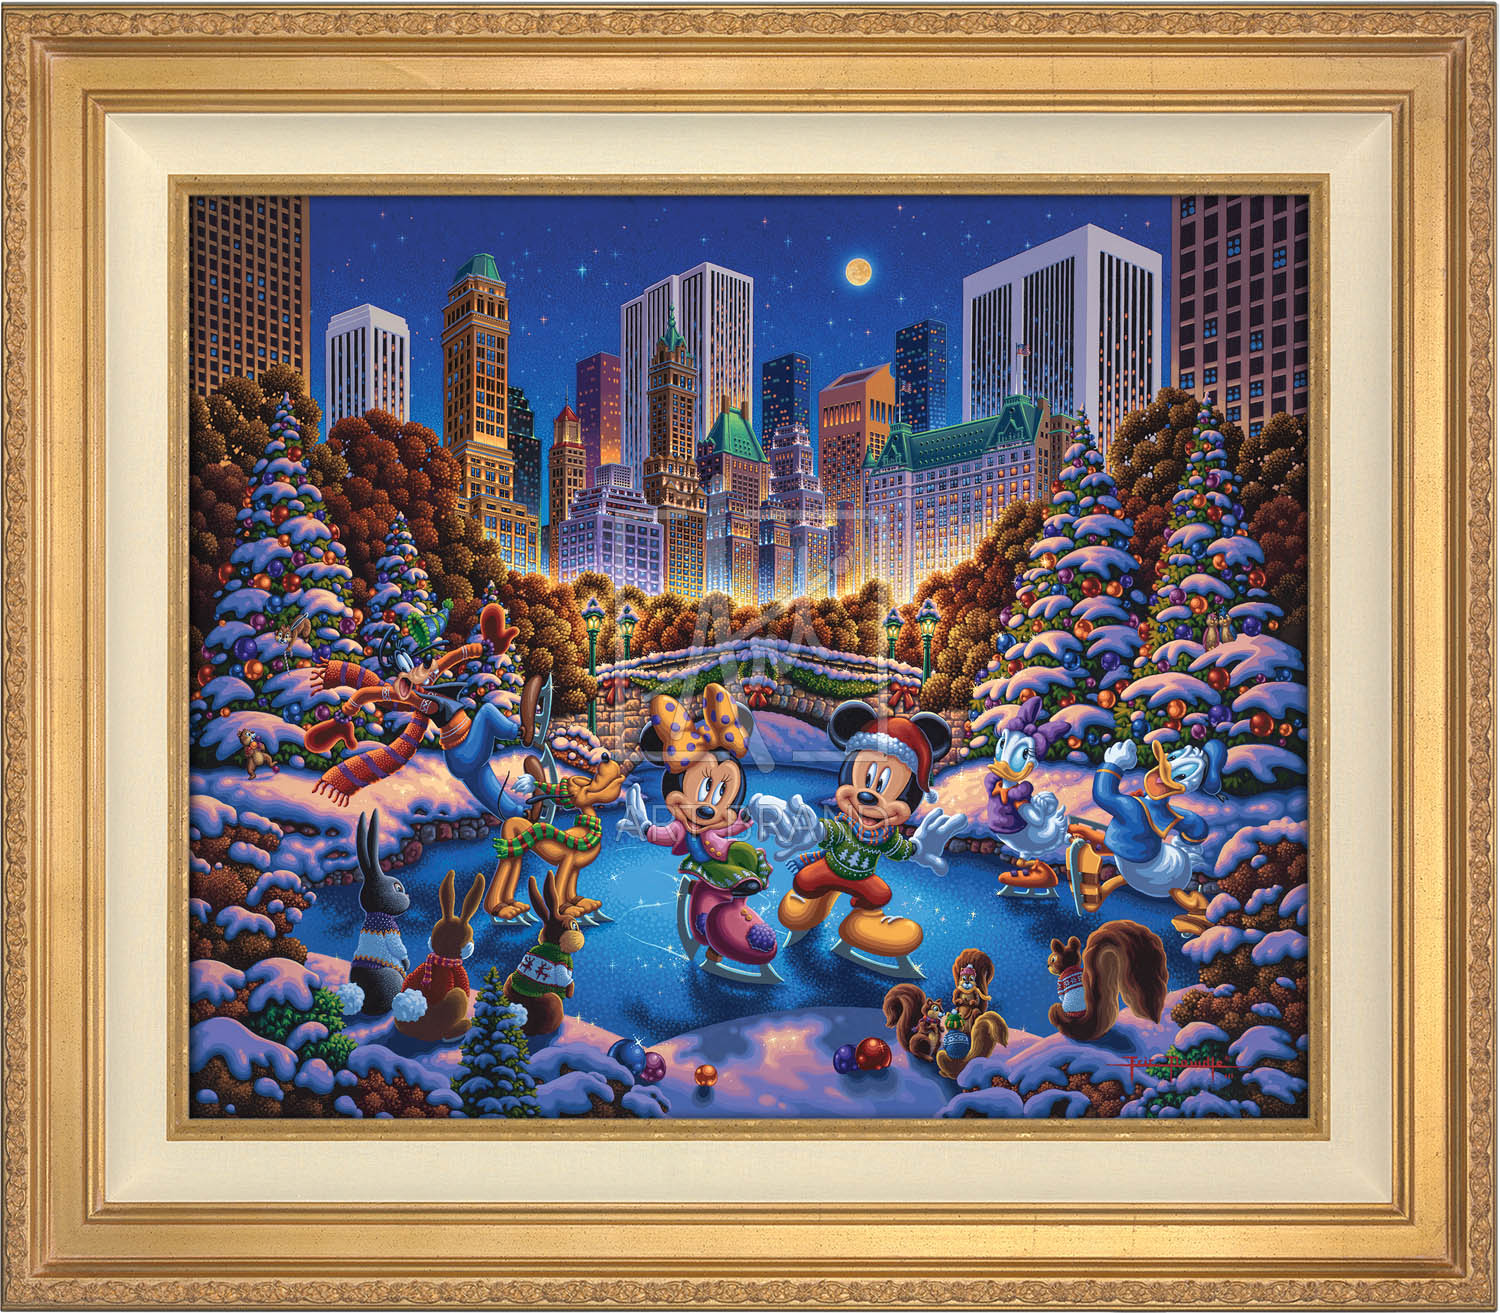 Mickey and Minnie dressed from head to toe in traditional holiday attire, as the enjoy evening skating with friends - Antique Gold frame.